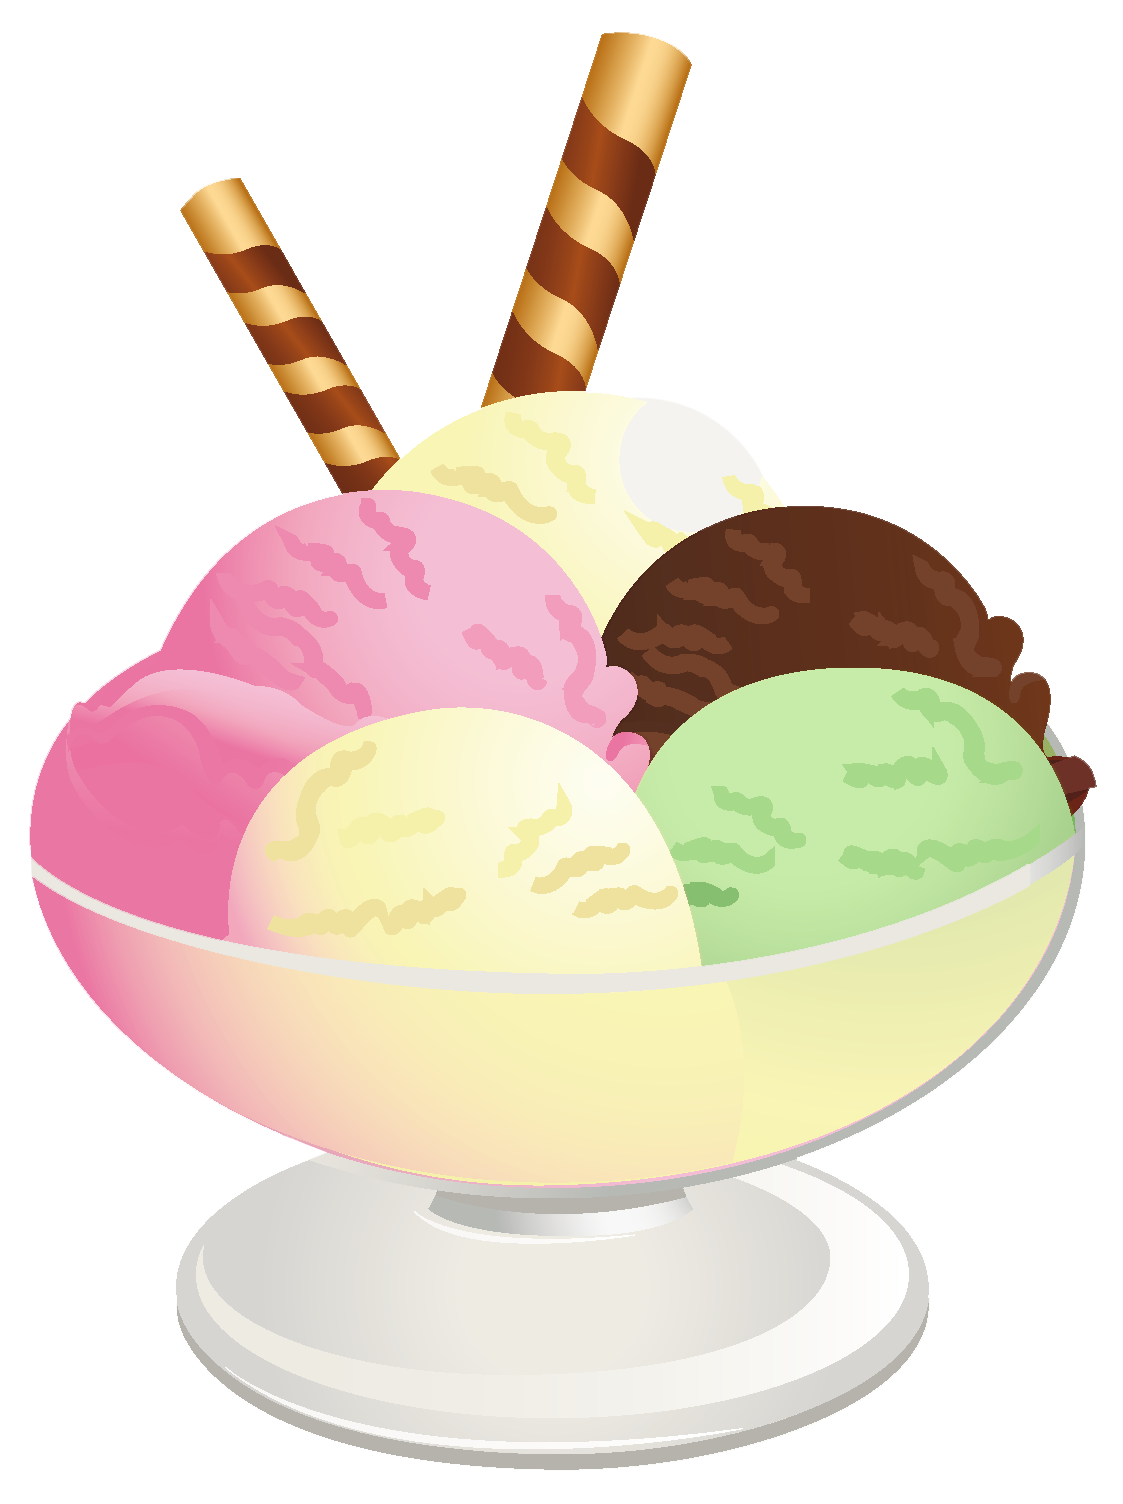 Ice Cream Desserts PNG High-Quality Image